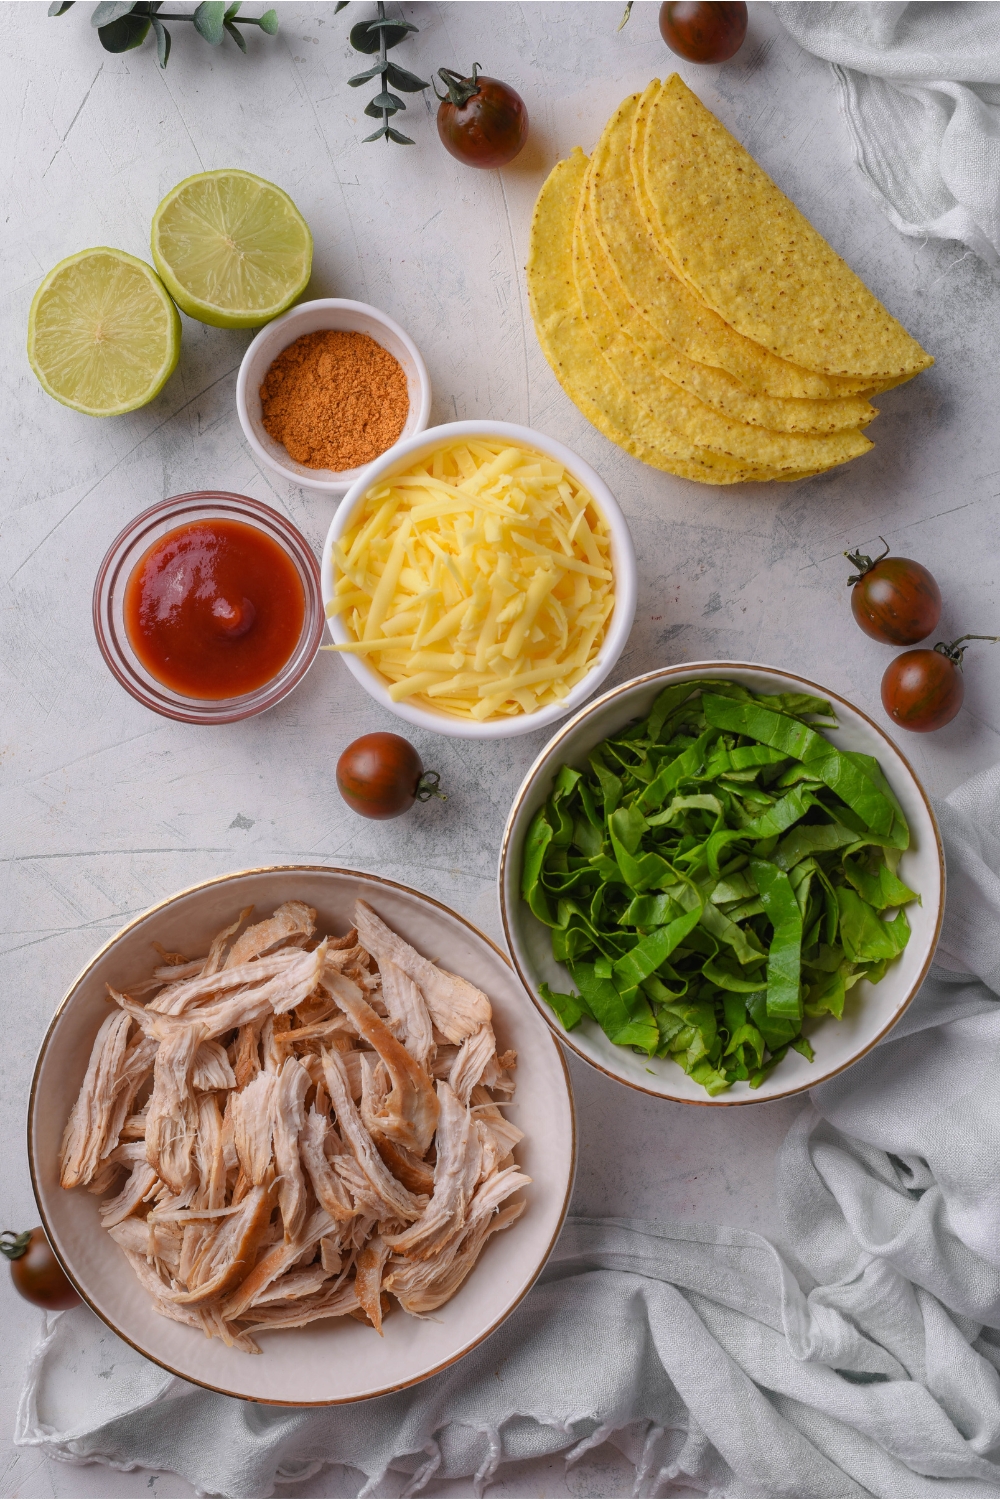 An assortment of ingredients including a stack of crispy taco shells, a lime cut in half, cherry tomatoes, and bowls of tomato paste, shredded lettuce, shredded cheese, spices, and shredded chicken.